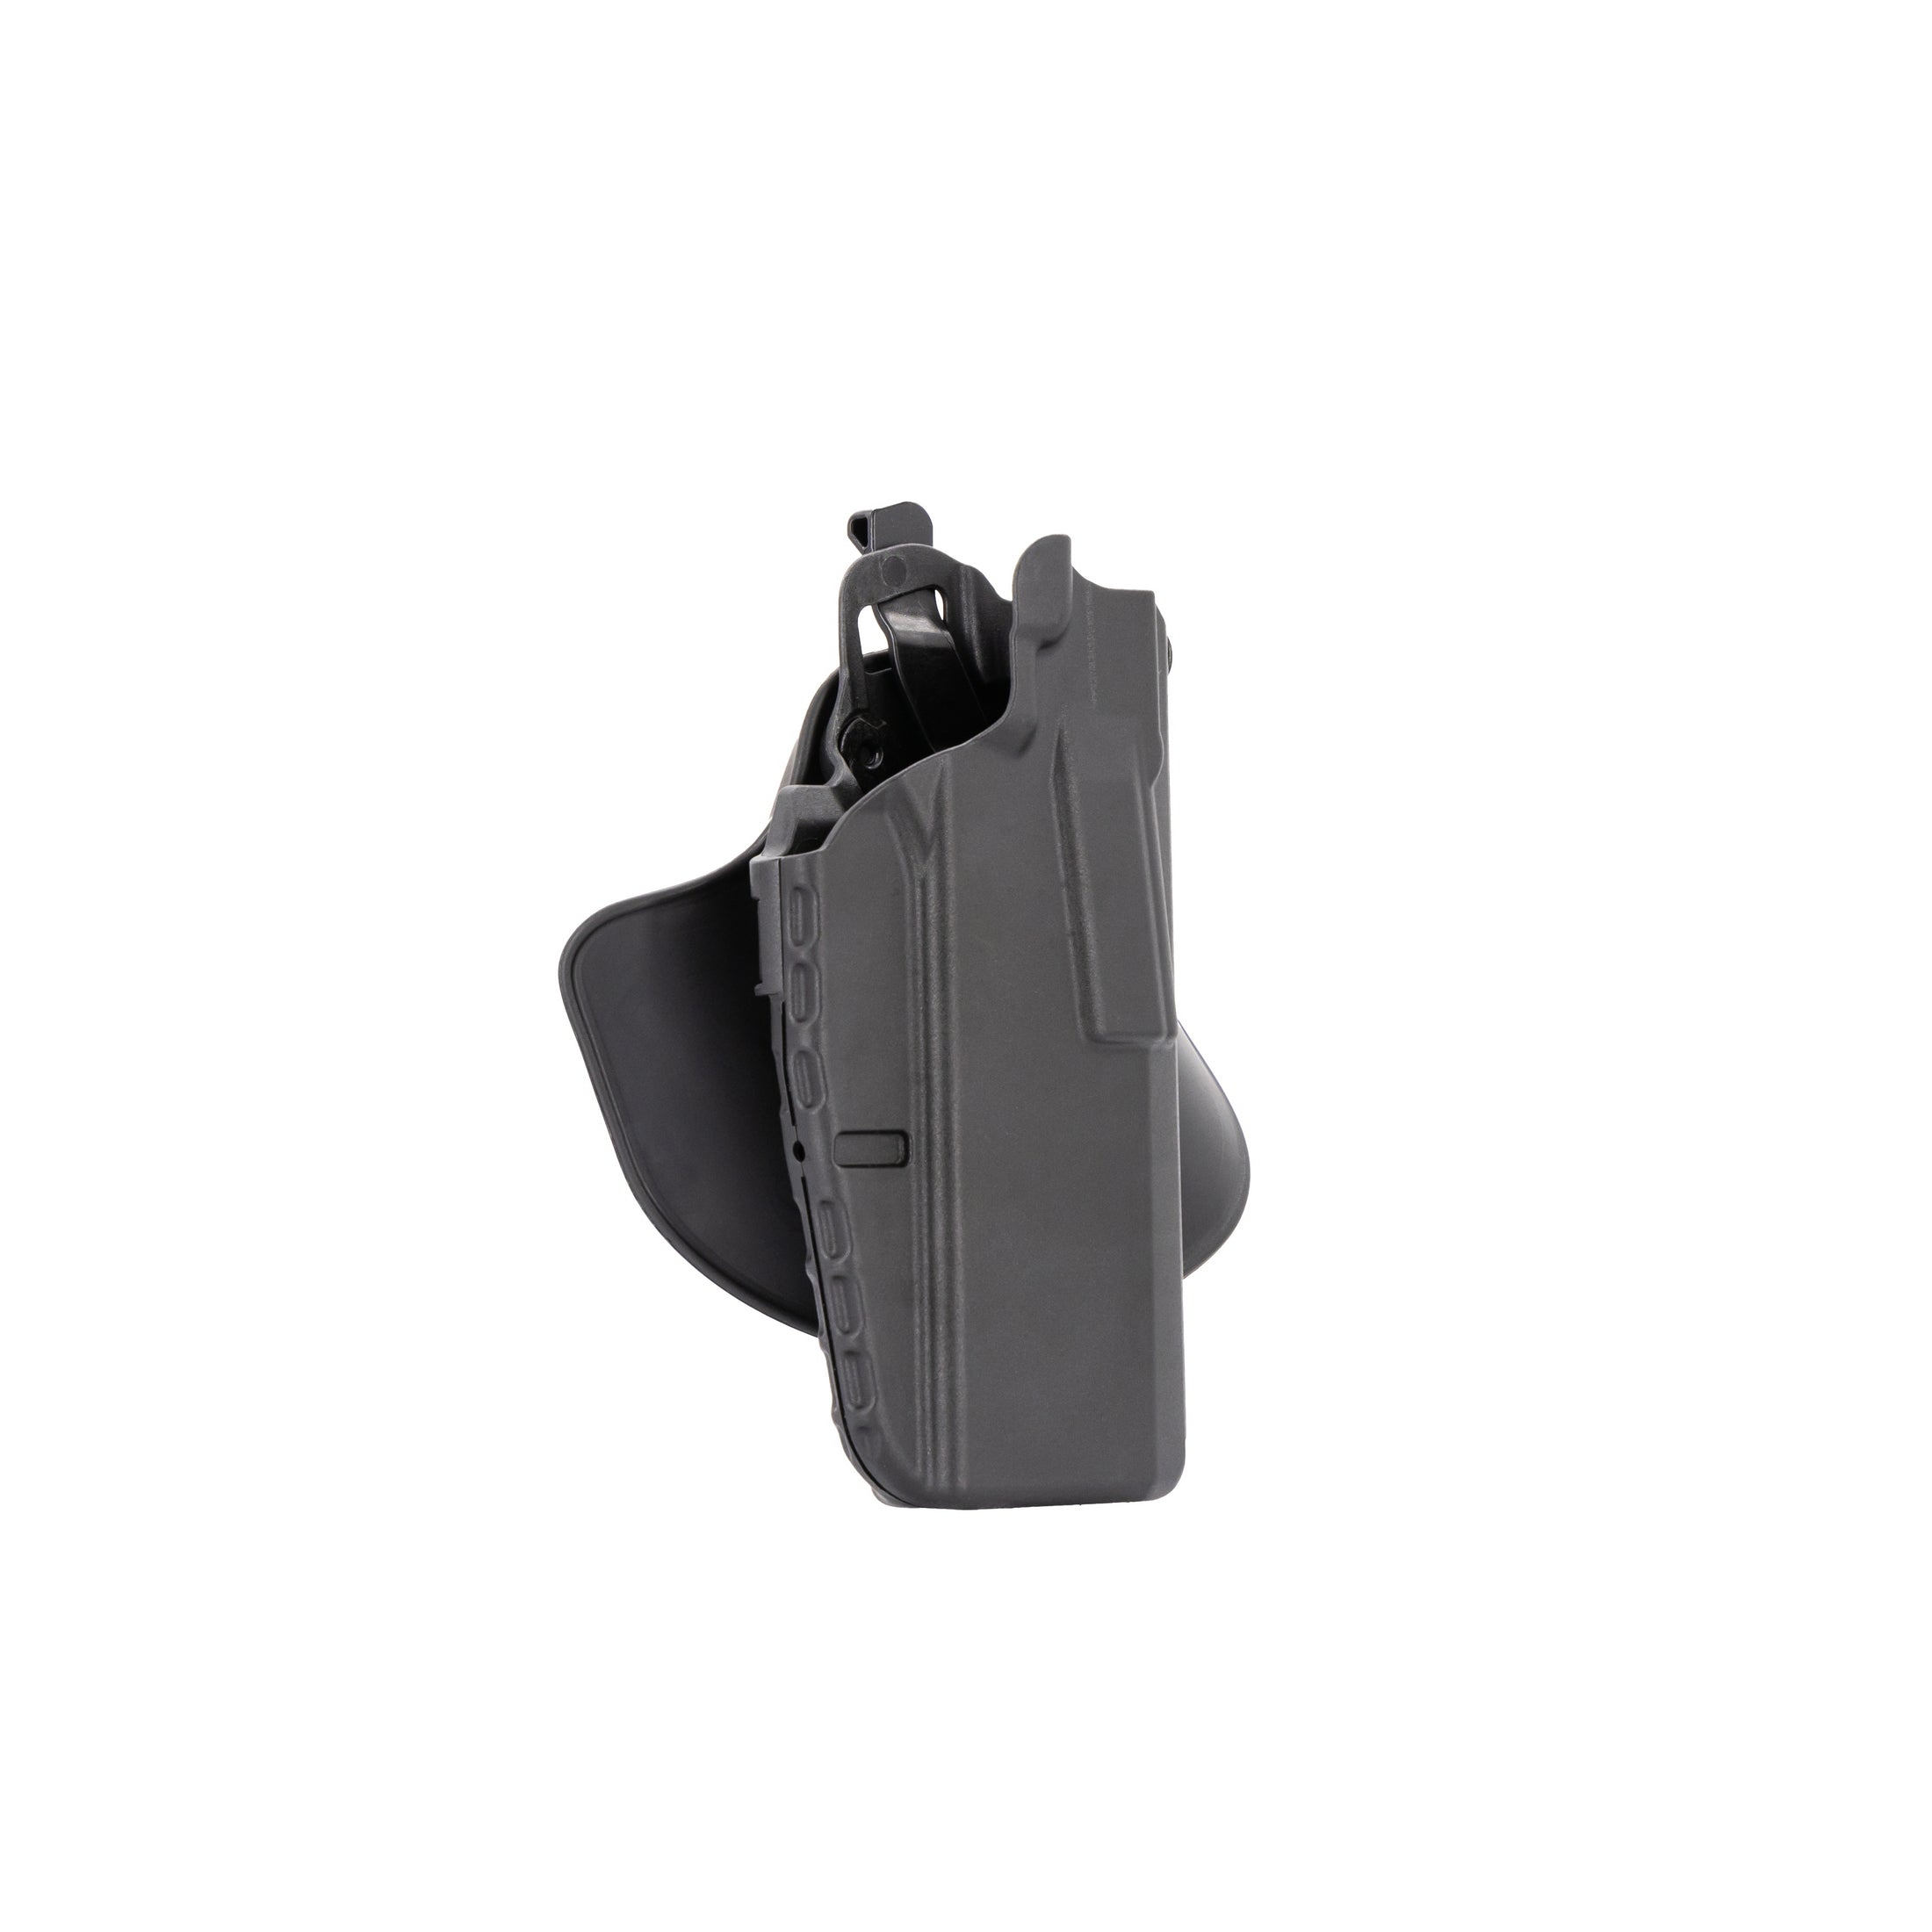 Model 7378 7TS™ ALS® Concealed Carry Holster | Safariland